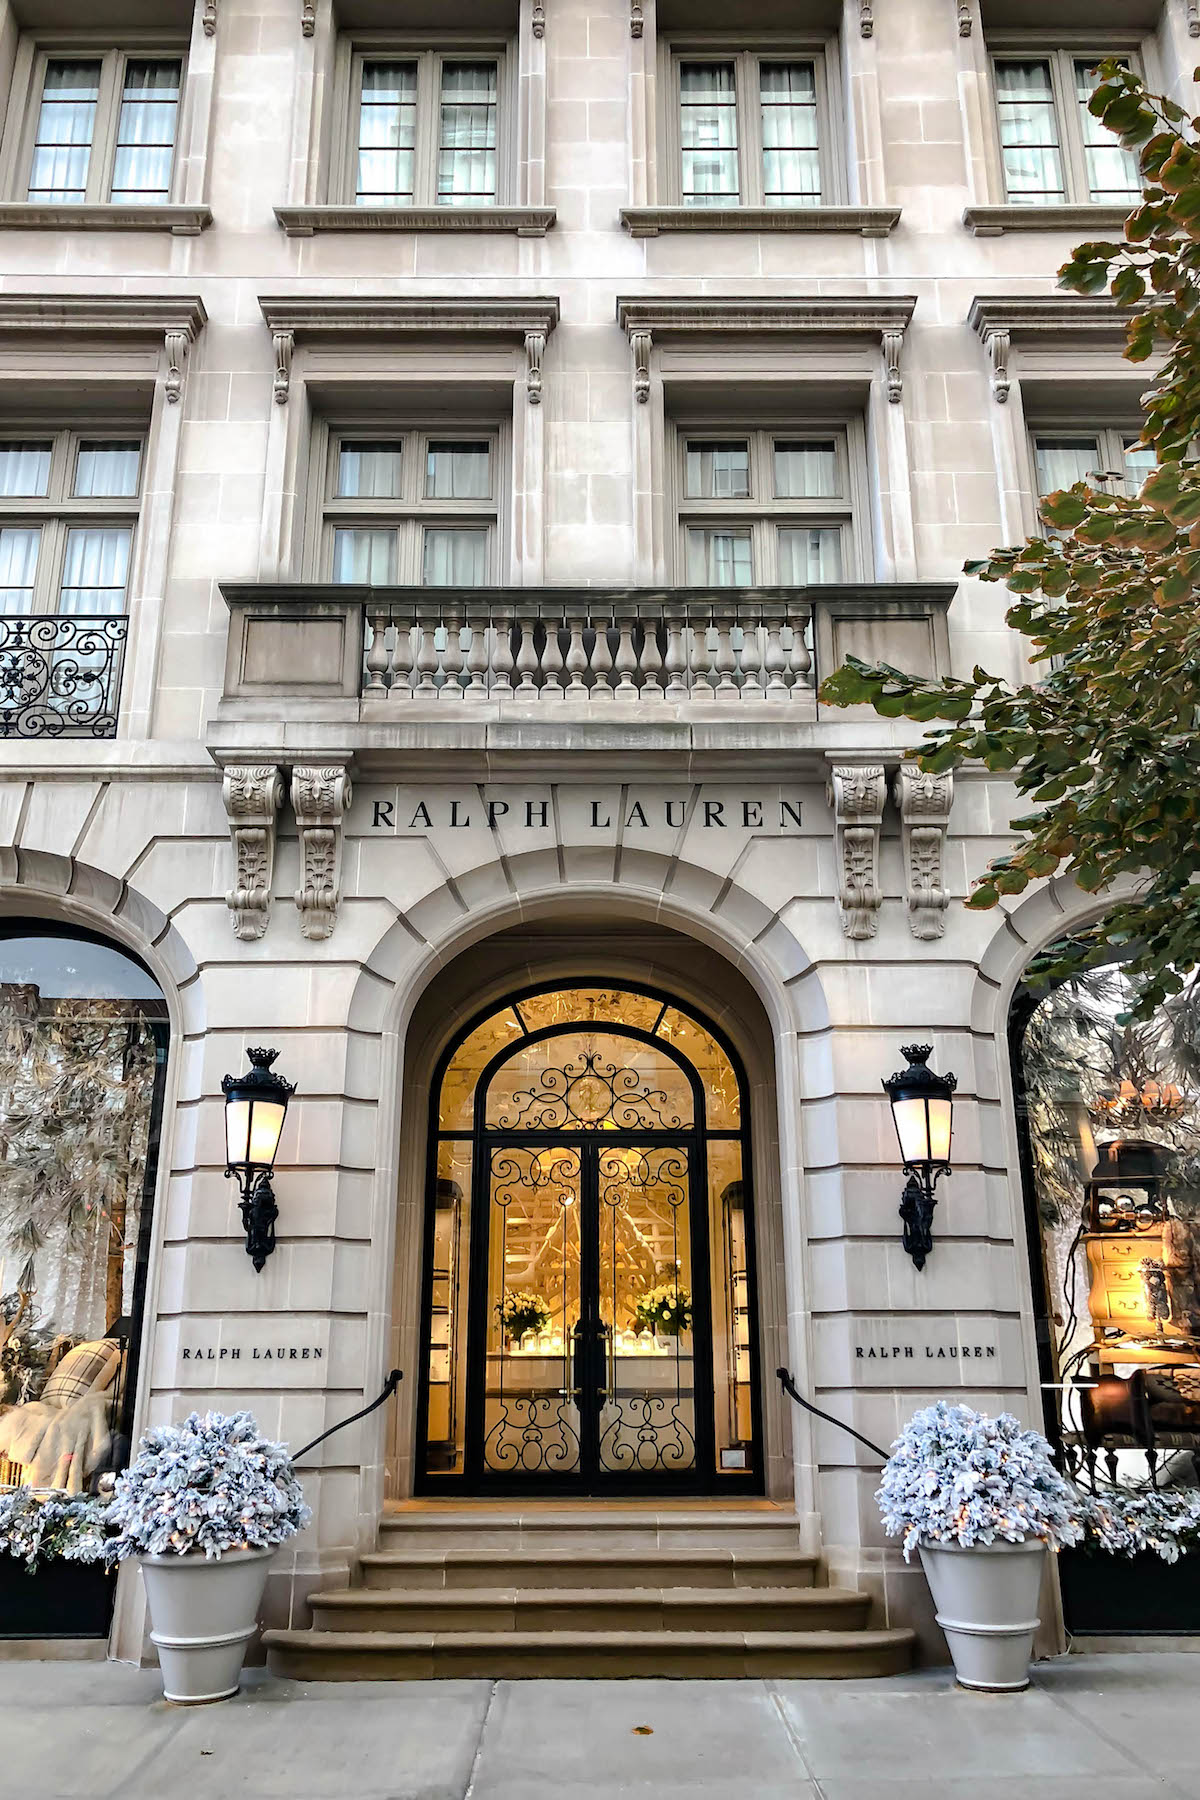 Ralph Lauren New York Store Holiday Decorations | New York City Holiday Guide